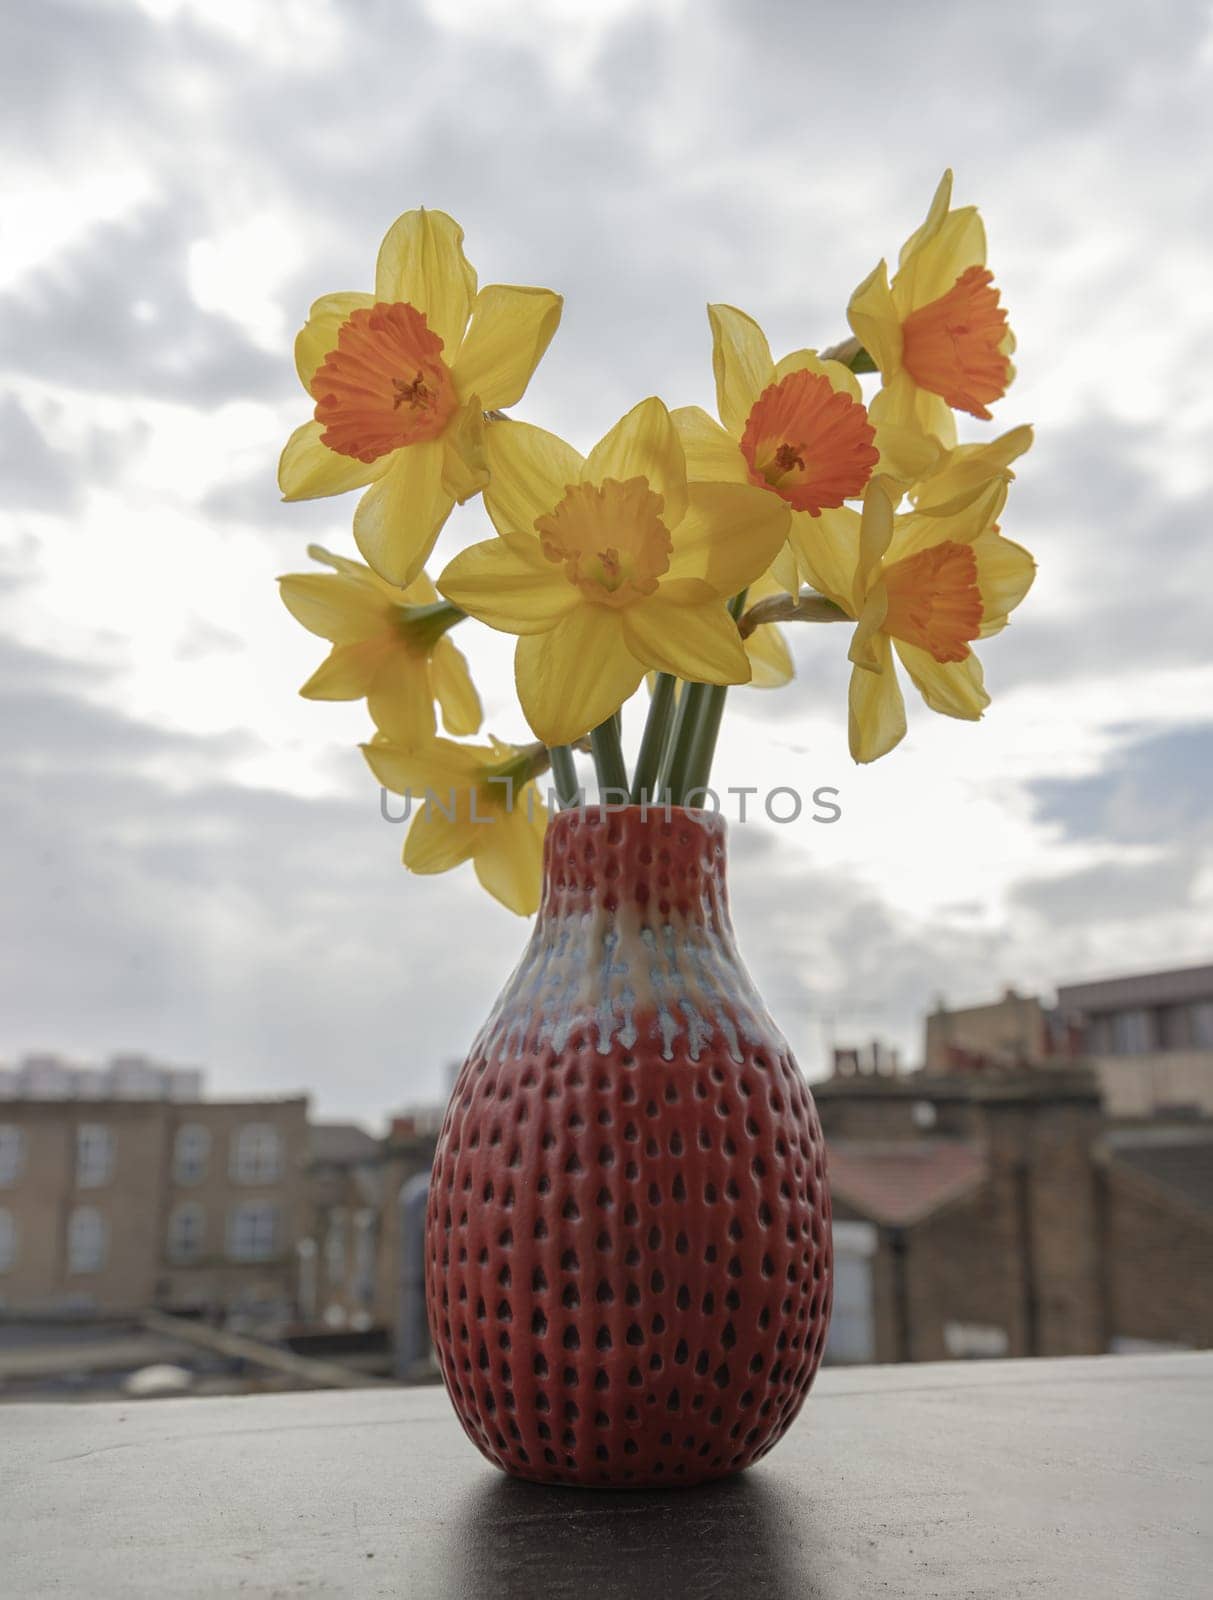 Bunch of daffodils in a red ceramic vase on the terrace with sky background. Arrangement of Yellow Spring Flowers Daffodils, Amazing view background with Yellow flowers, Copy space, Selective focus.